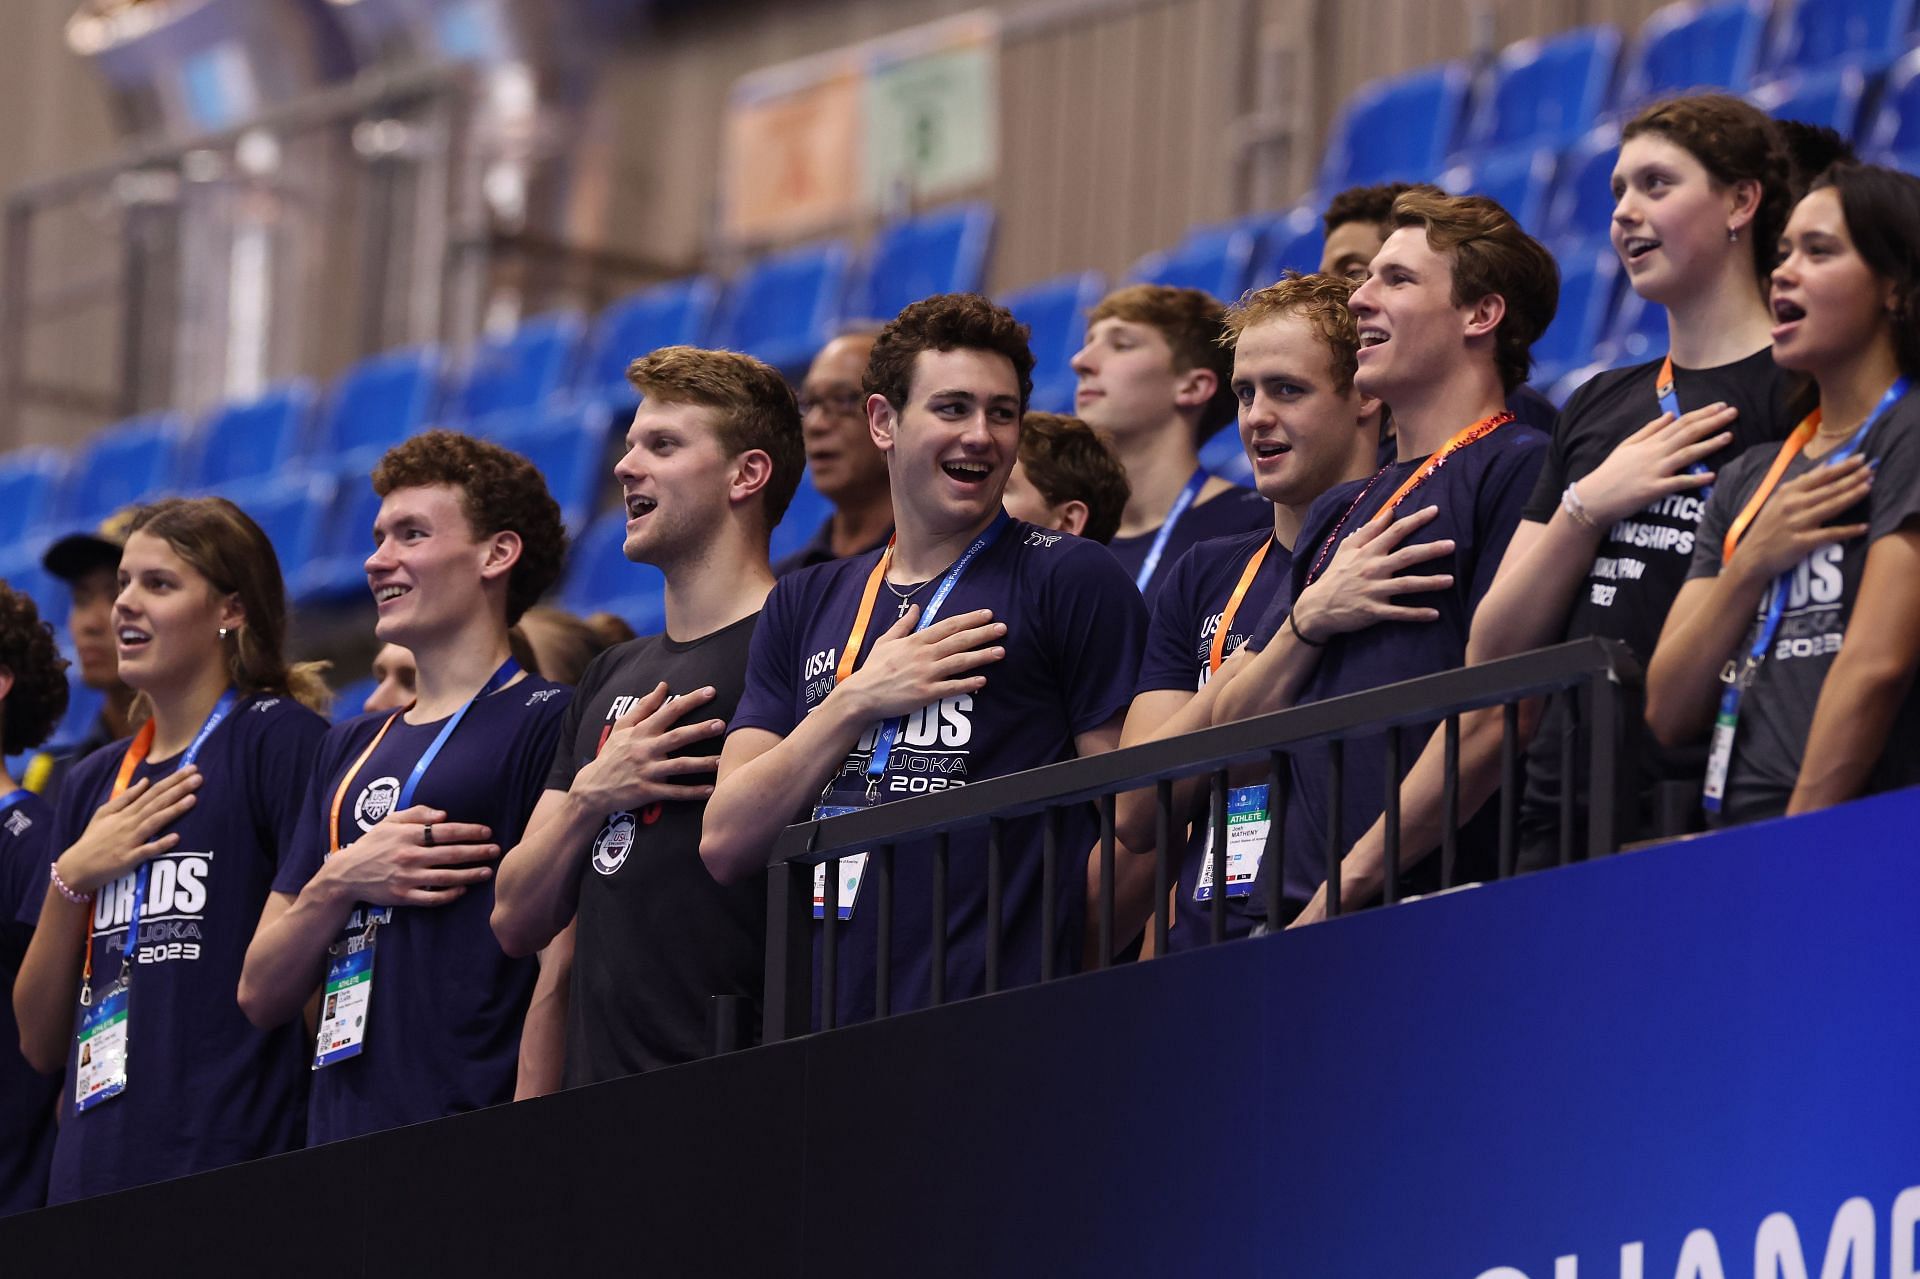 Team United States athletes show support during the medal ceremony on day eight of the Fukuoka 2023 World Aquatics Championships